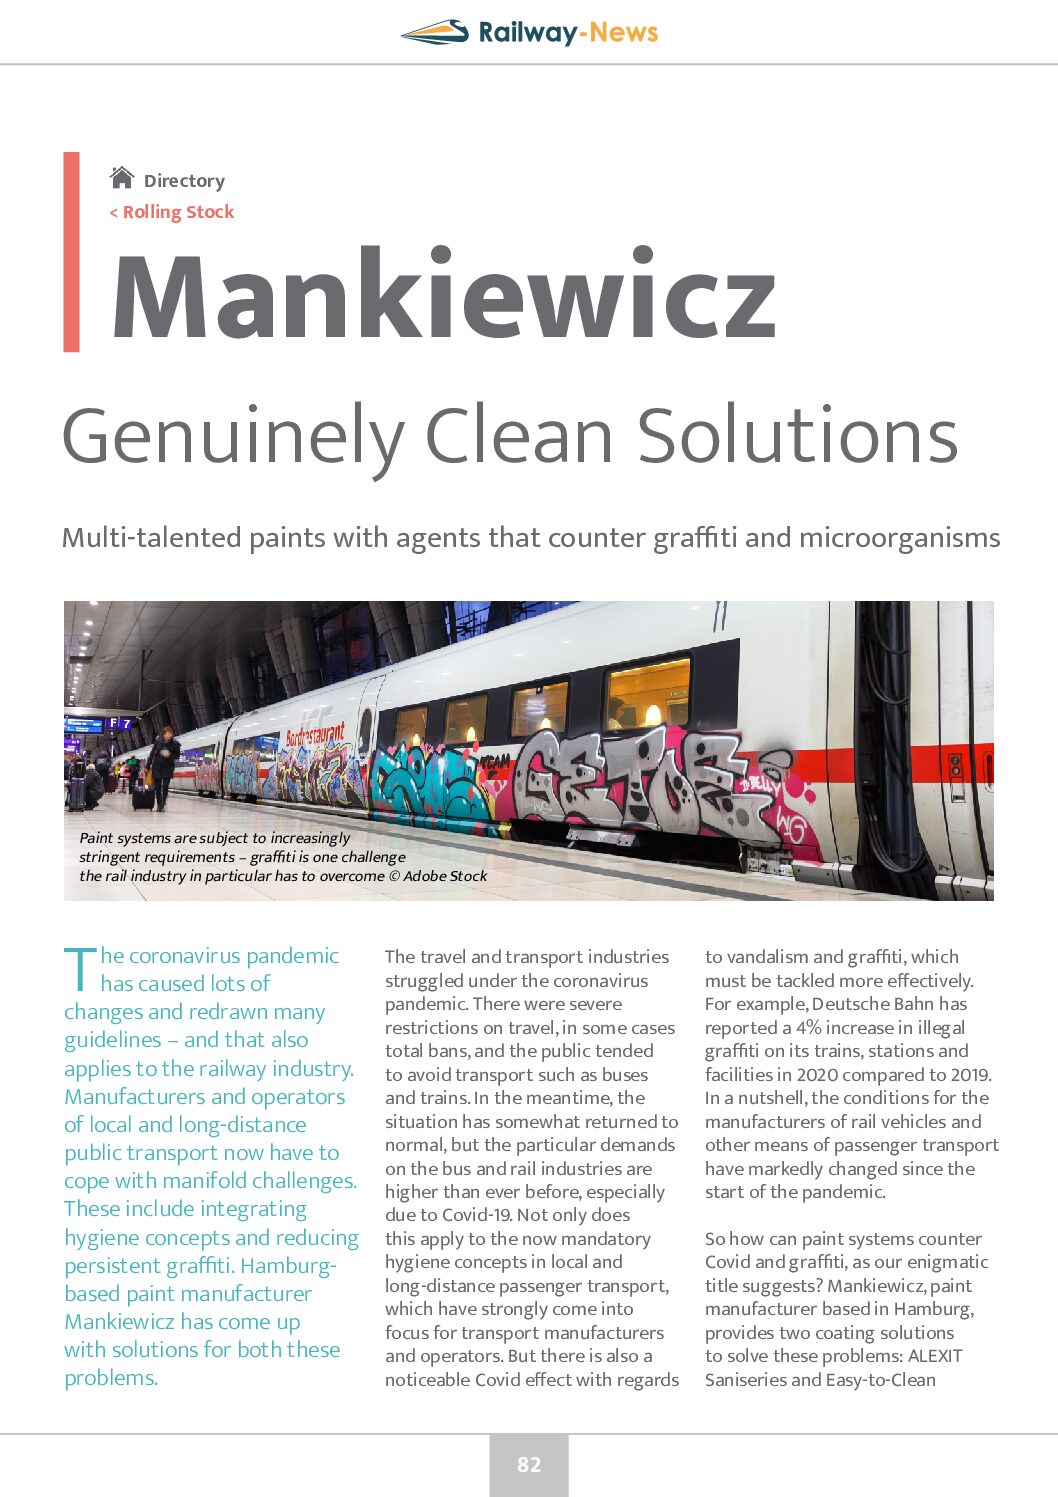 Mankiewicz – Genuinely Clean Solutions